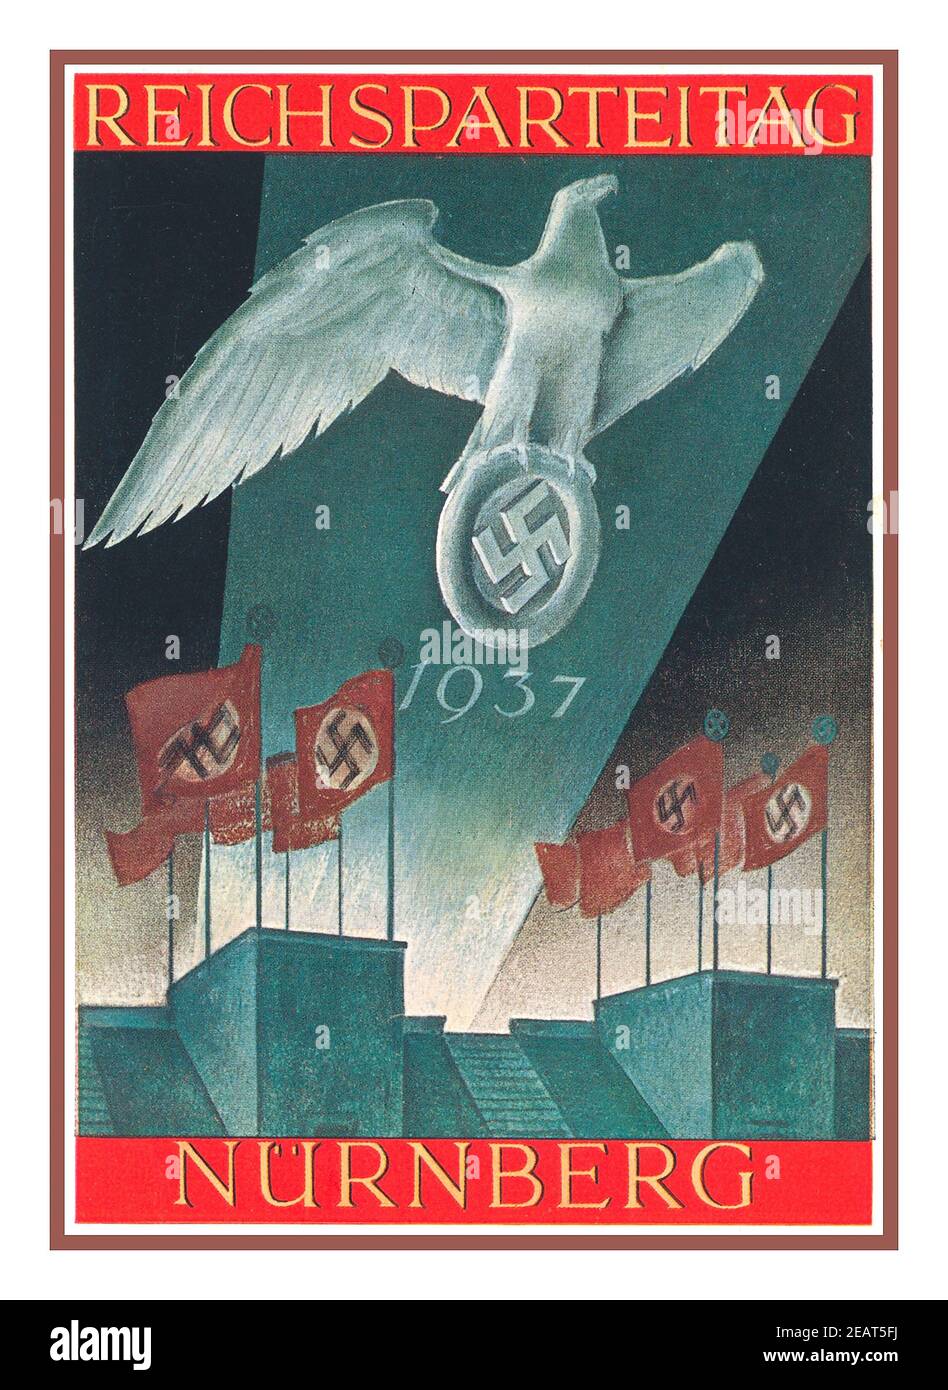 Vintage 1930's Nazi Propaganda Poster Card 'REICHSPARTEITAG NURNBERG Nazi Germany 1937 with German Eagle clutching swastika emblem Reichs Party Day Stock Photo